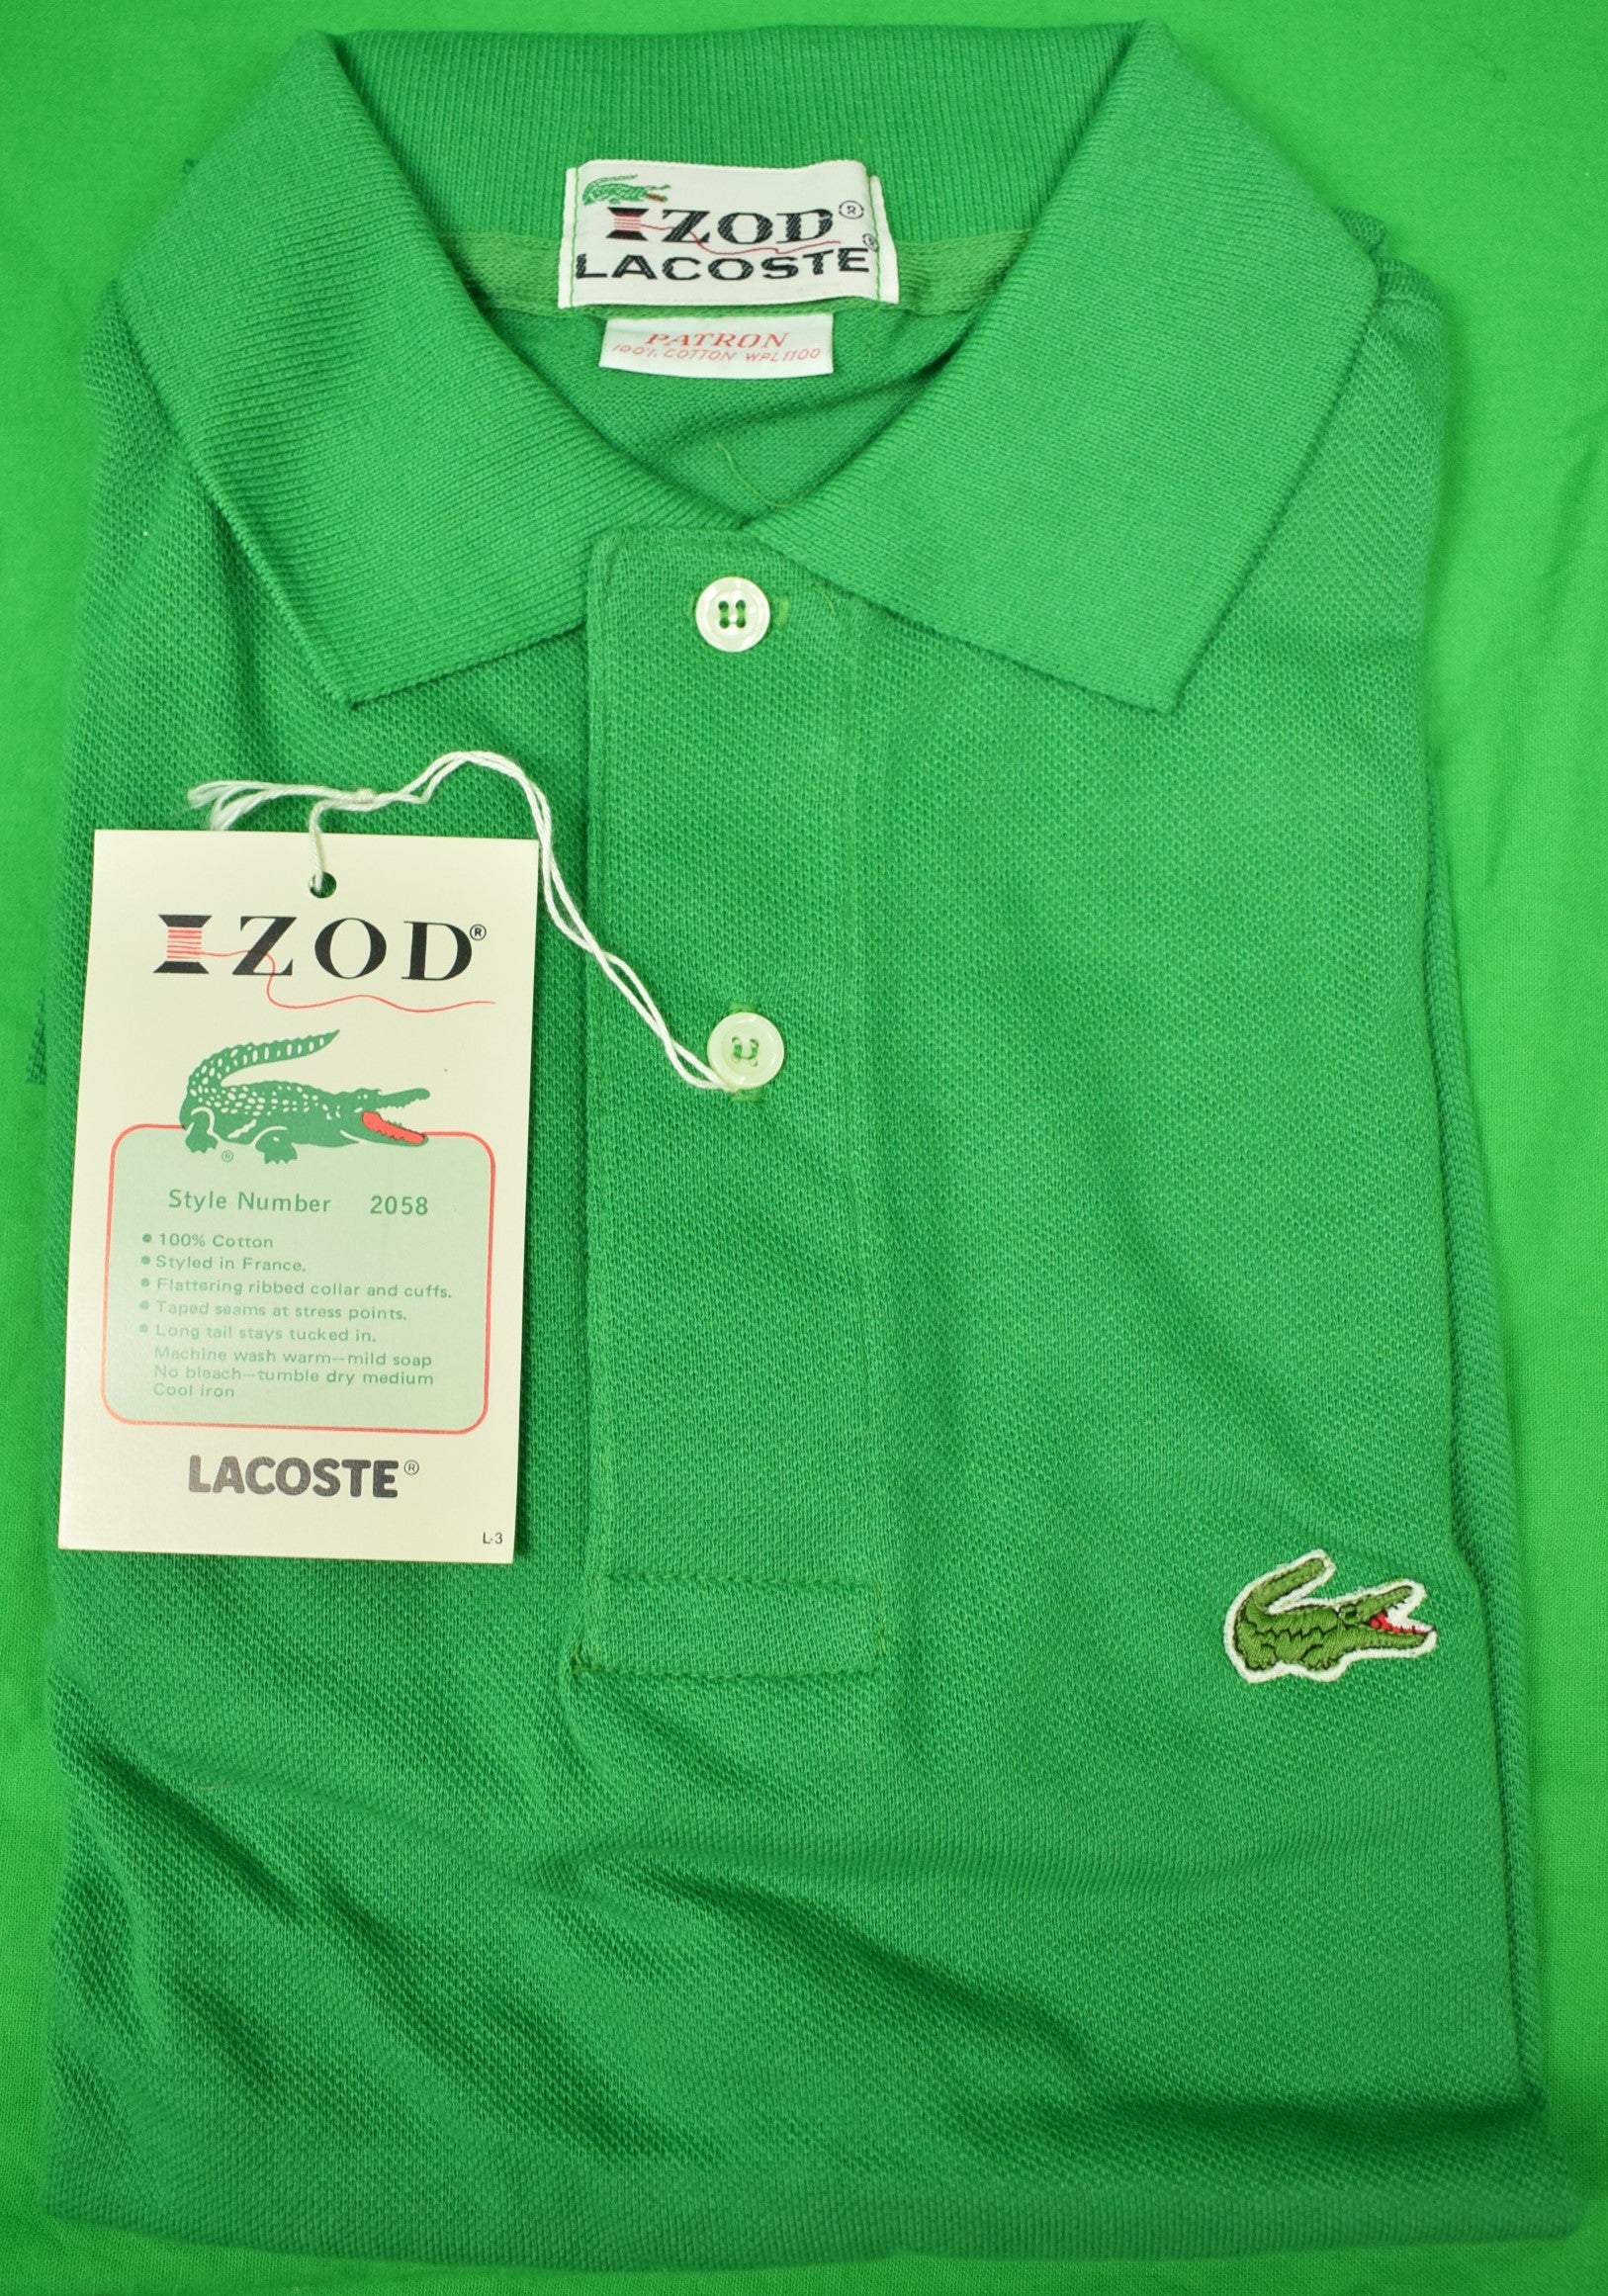 izod lacoste all products get up to 34% off